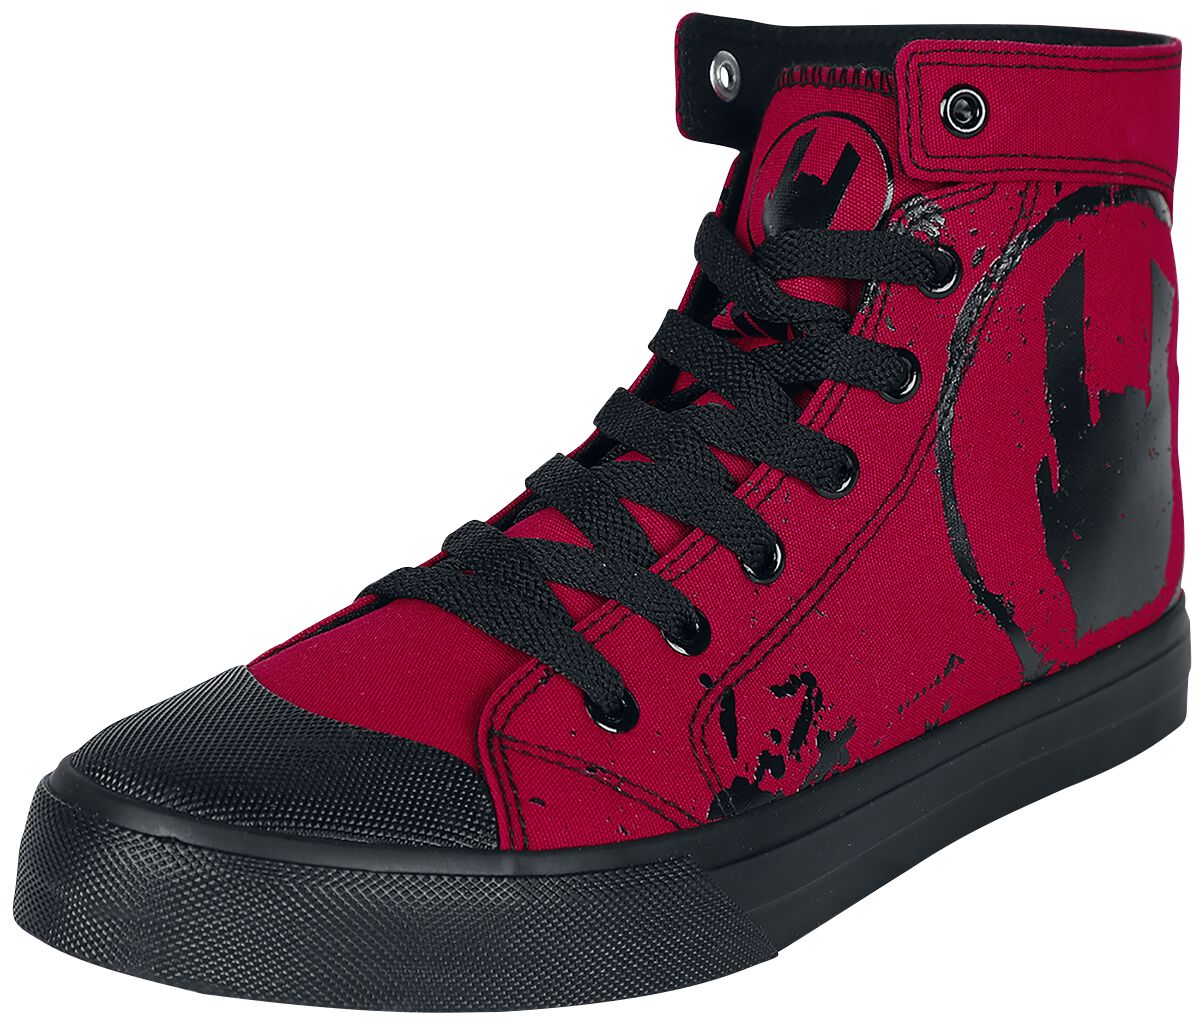 EMP Basic Collection Rote Sneaker mit Rockhand-Print Sneaker high rot in EU38